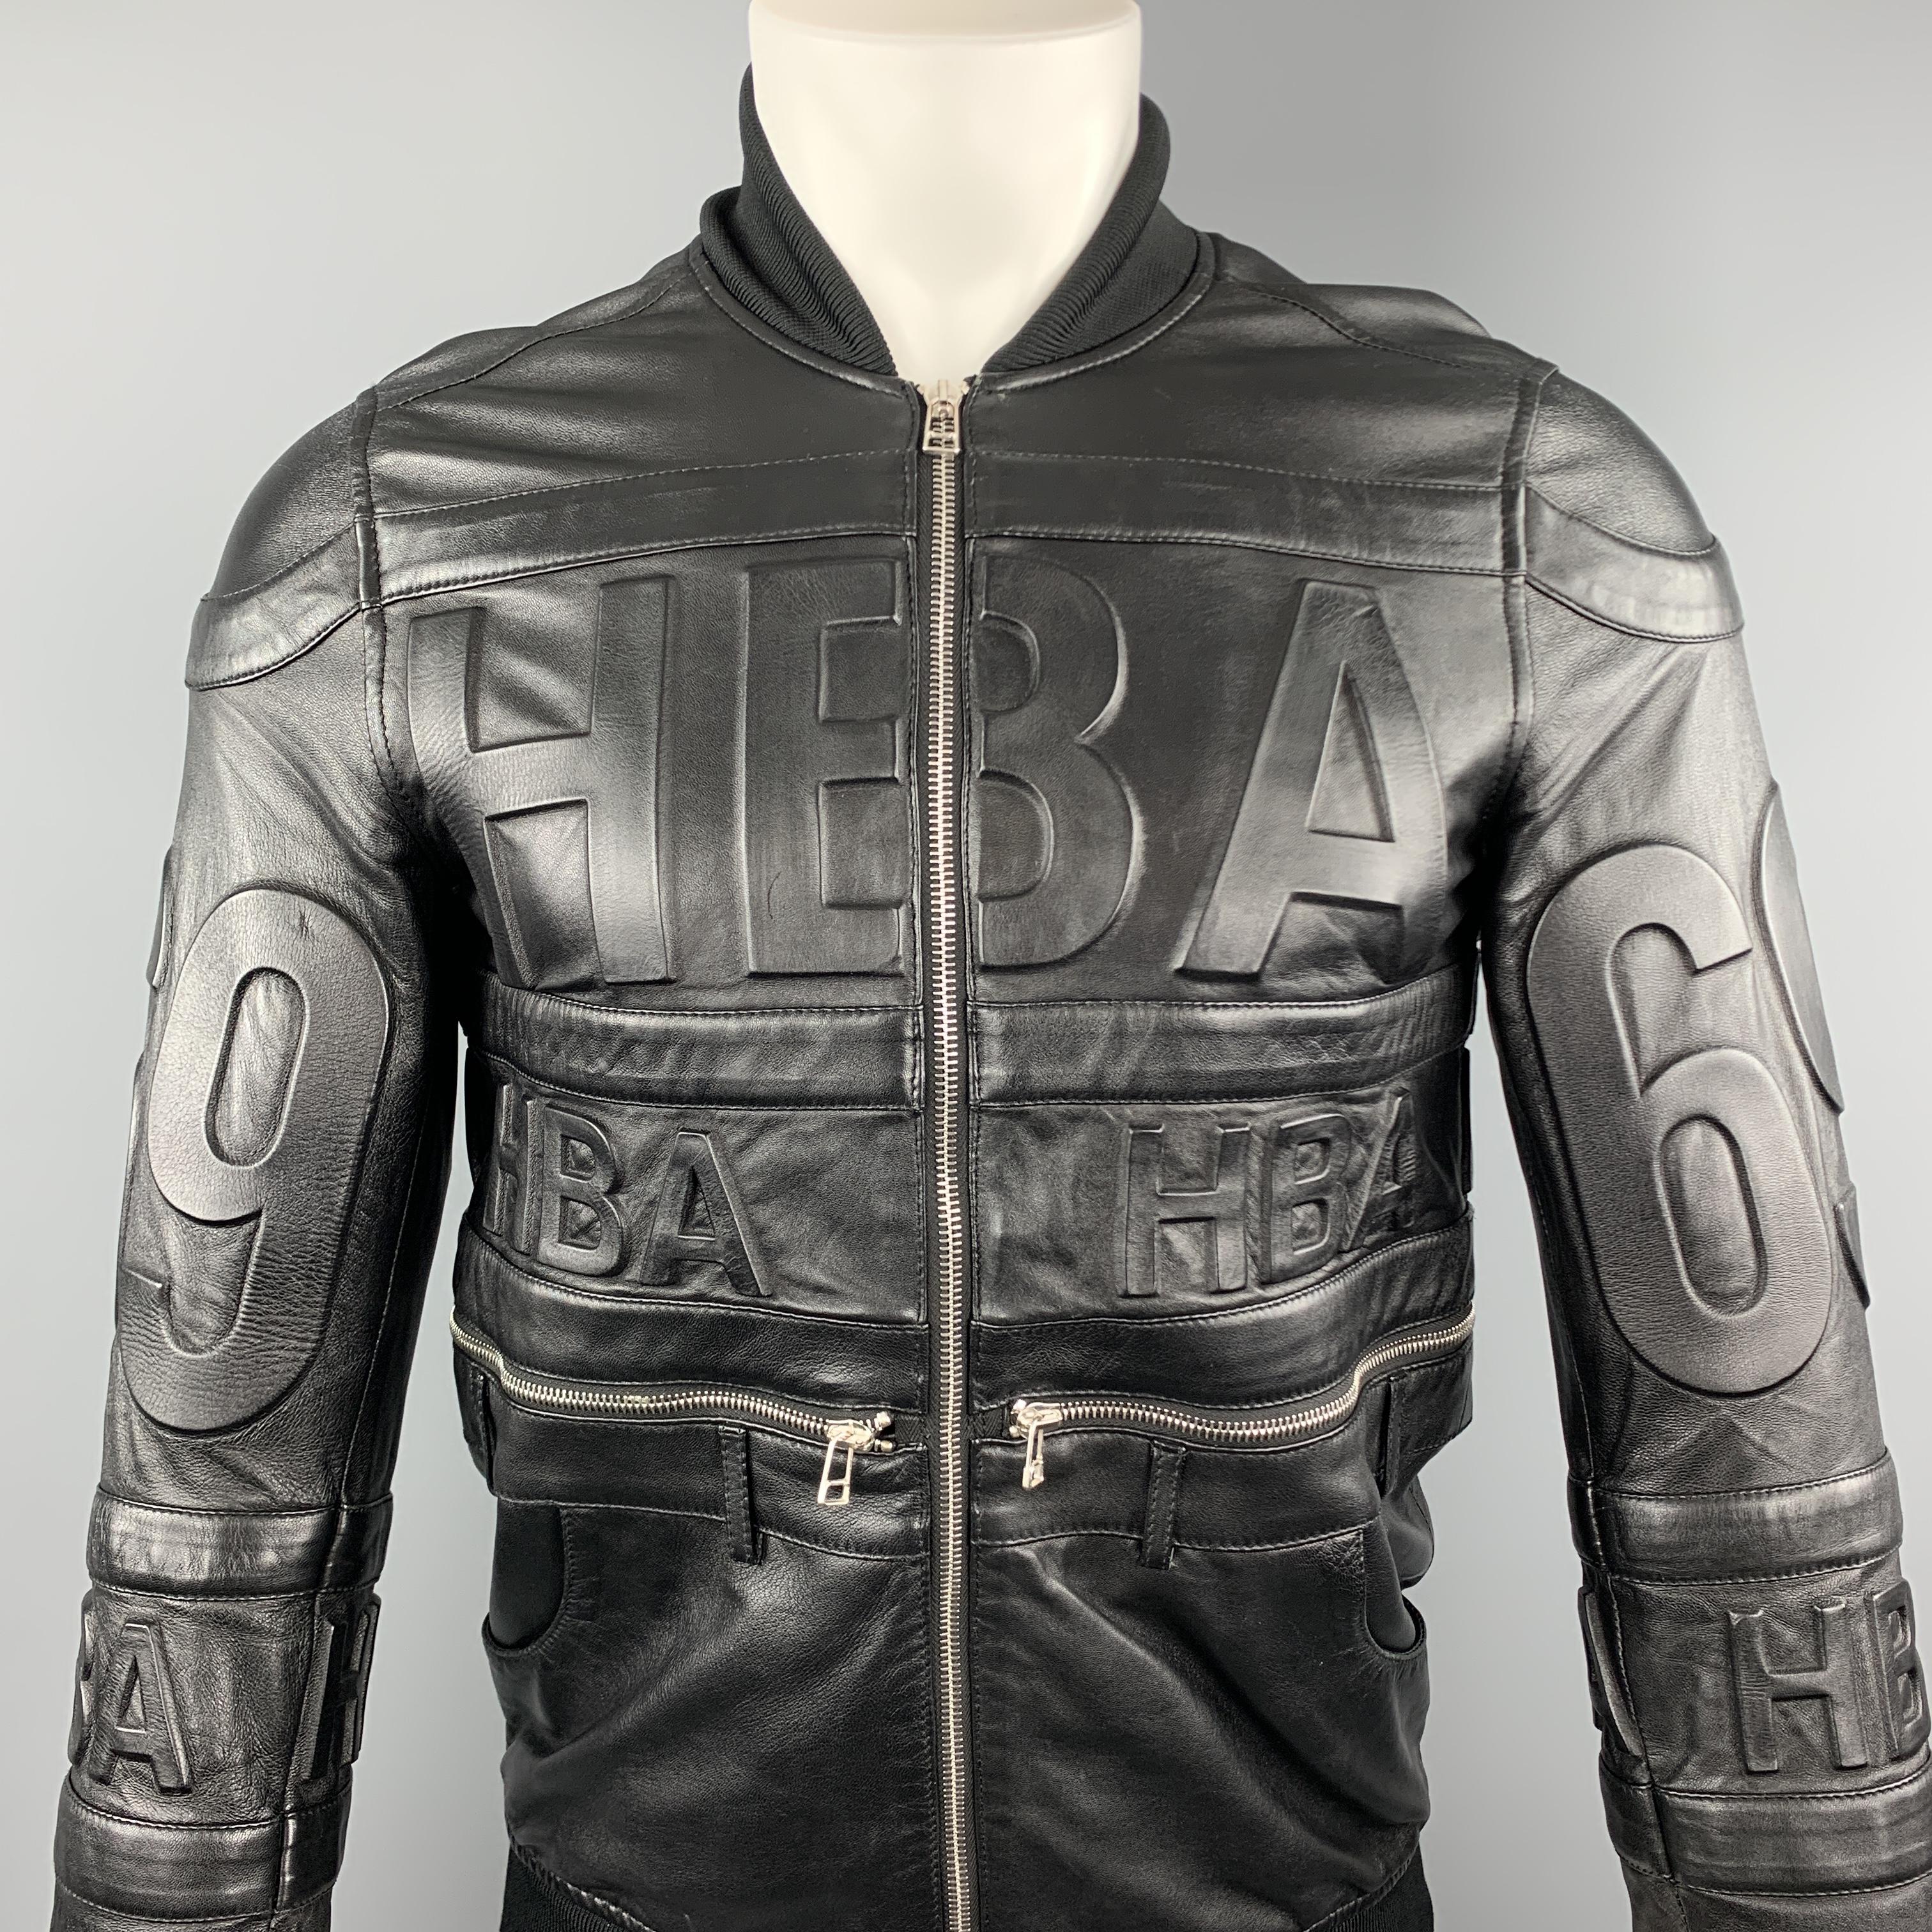 HOOD BY AIR jacket comes in a black leather featuring Hood By Air's signature embossed all-over detailing, exposed zippers, slim fit, ribbed jersey trim, and a full zip closure. Made in Europe.

Good Pre-Owned Condition.
Marked: